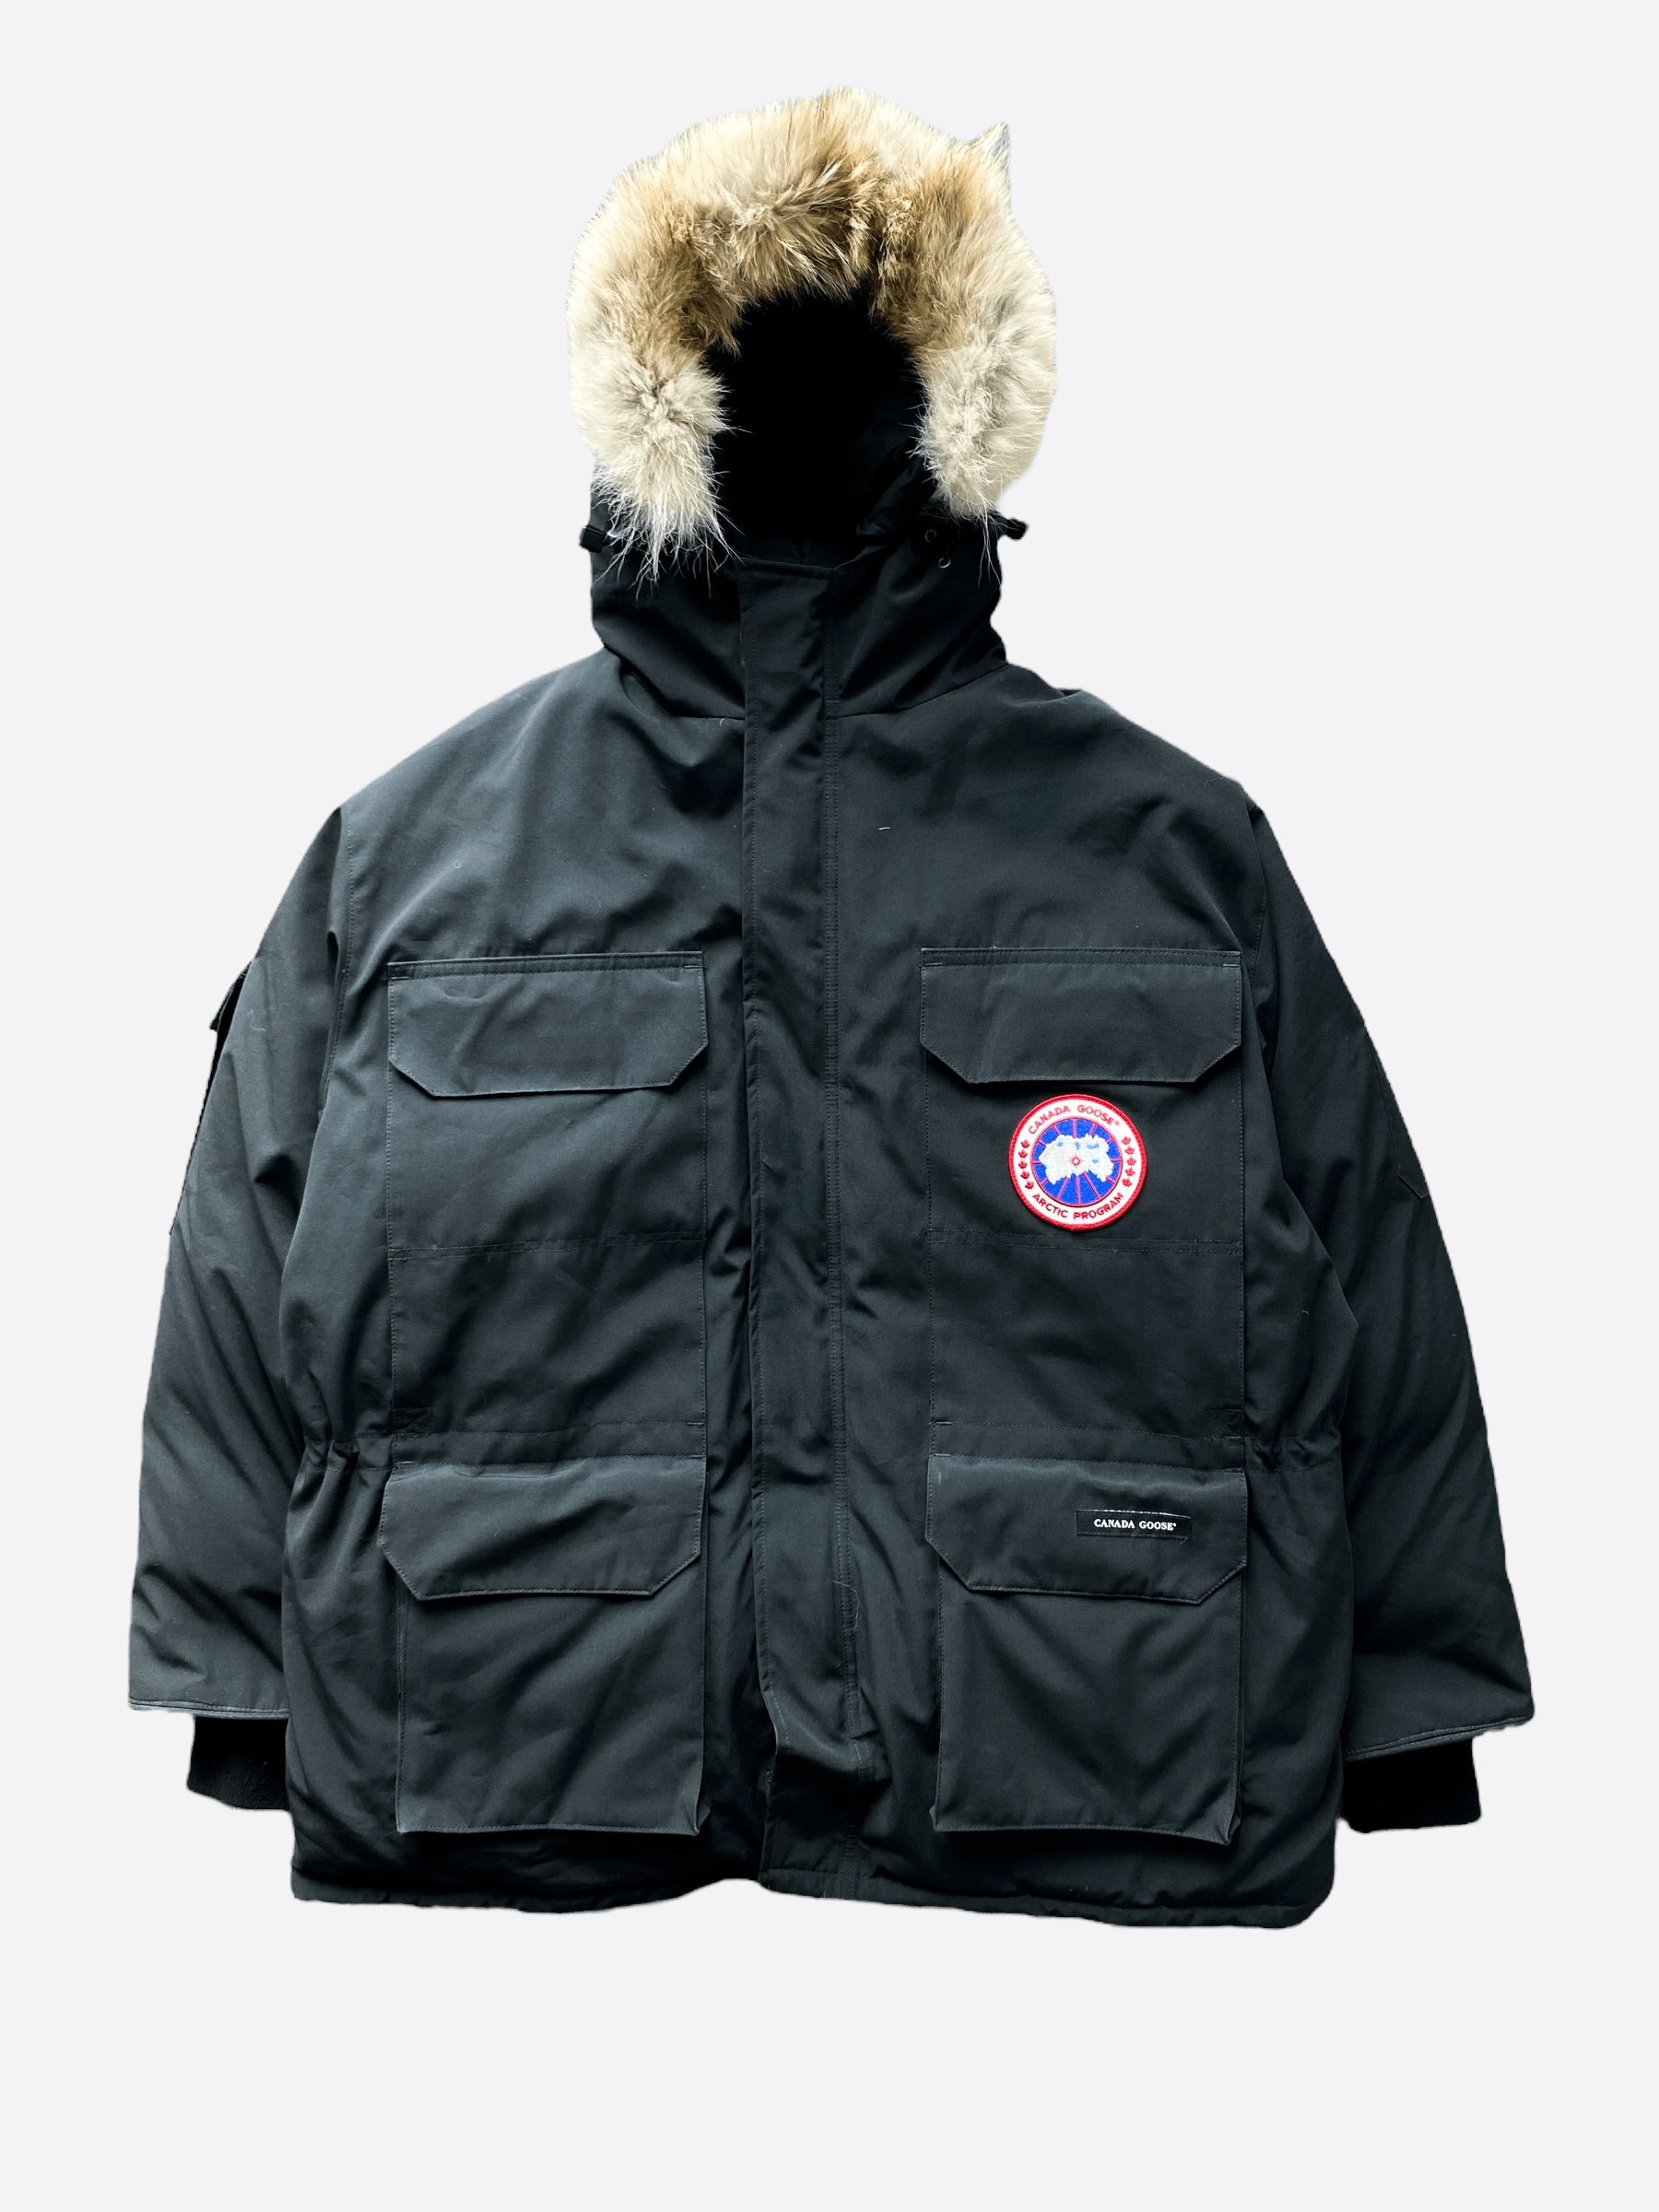 Pre-owned Canada Goose Black Expedition Men's Jacket (size Xl)